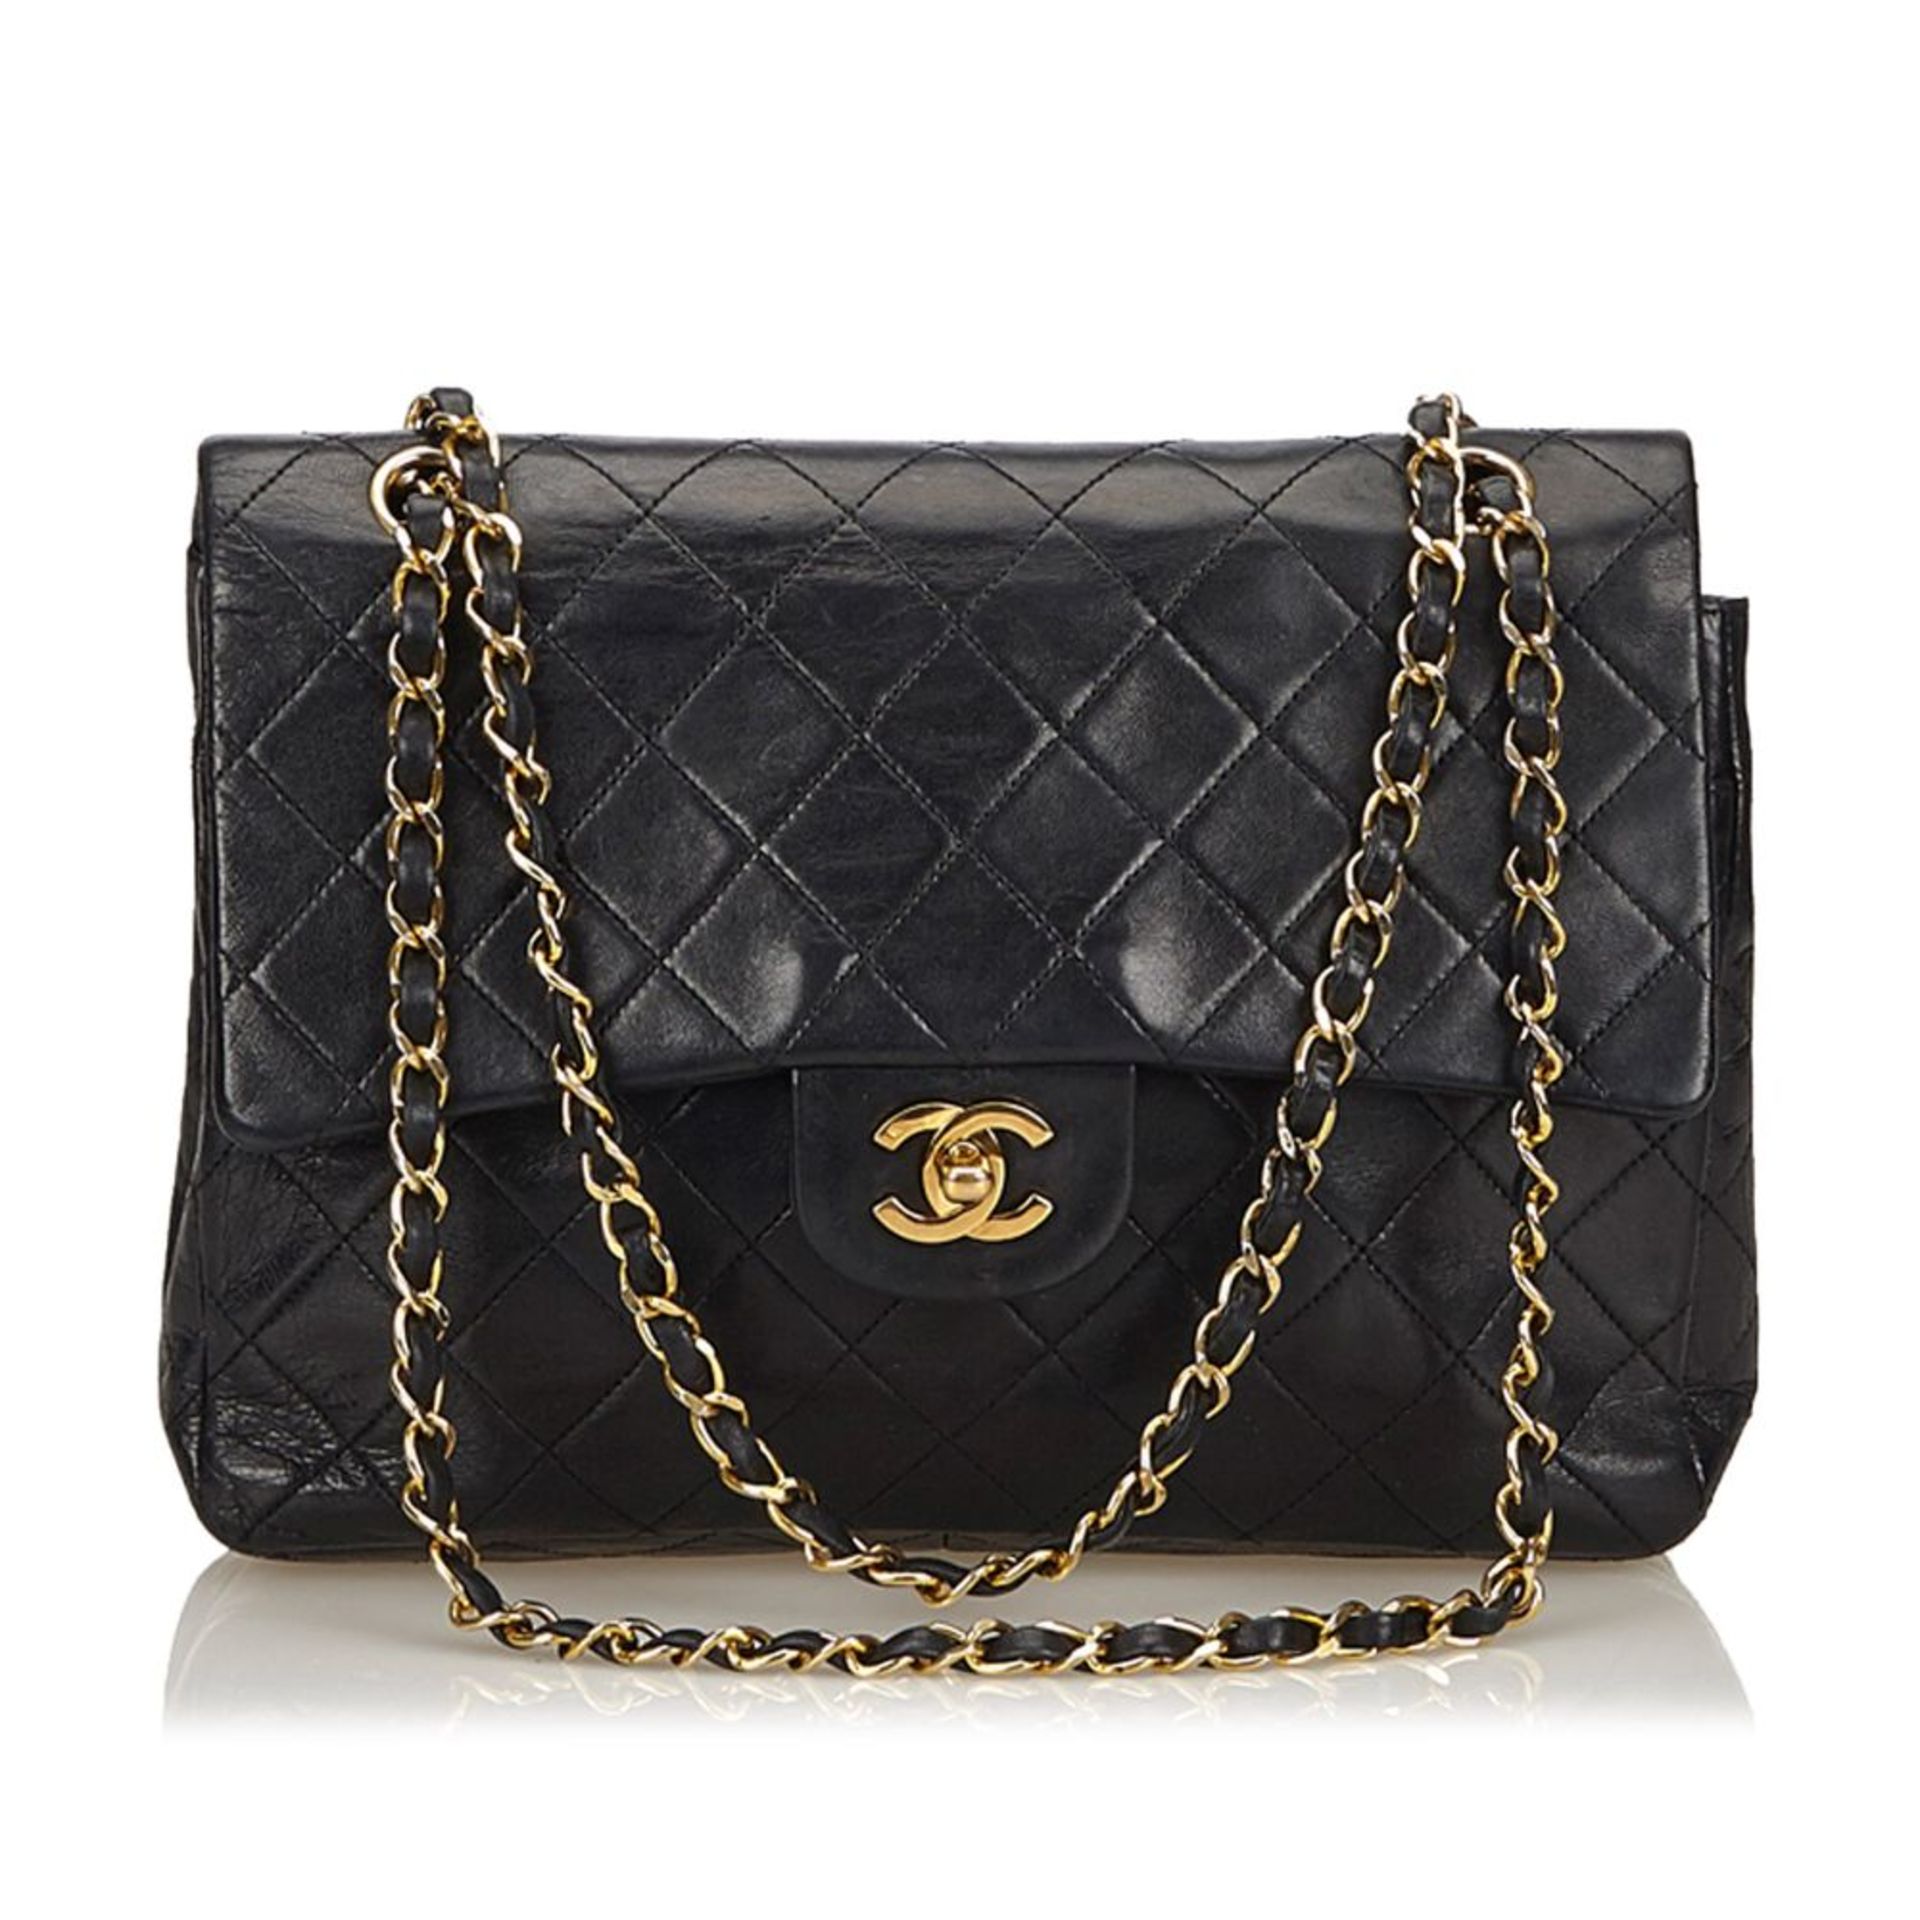 A Chanel classic medium double flap shoulder bag,featuring a quilted leather body, chain shoulder